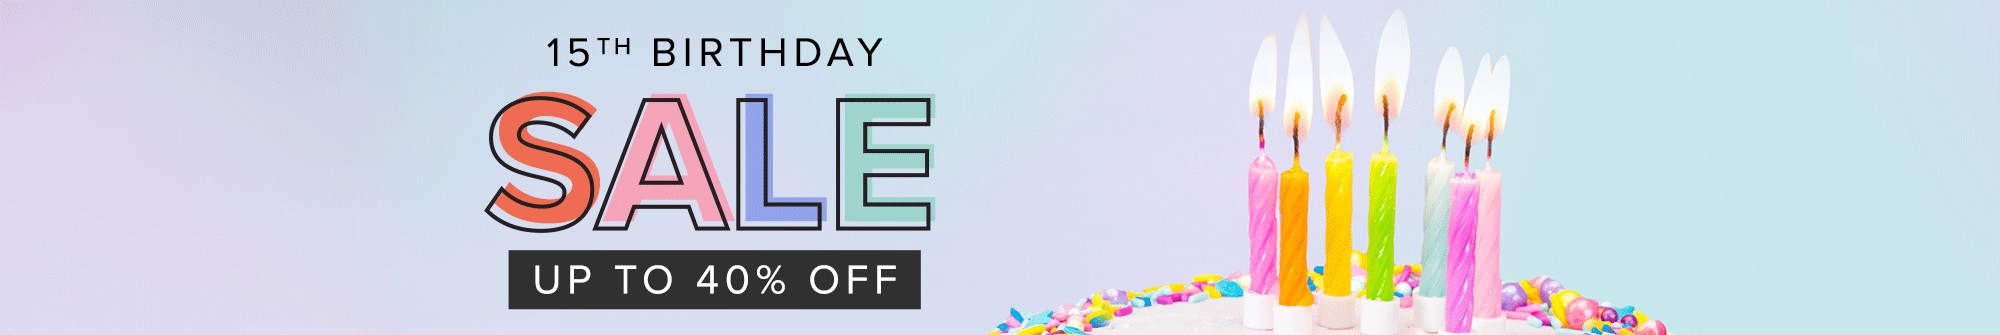 15th birthday sale. Up to 40% off